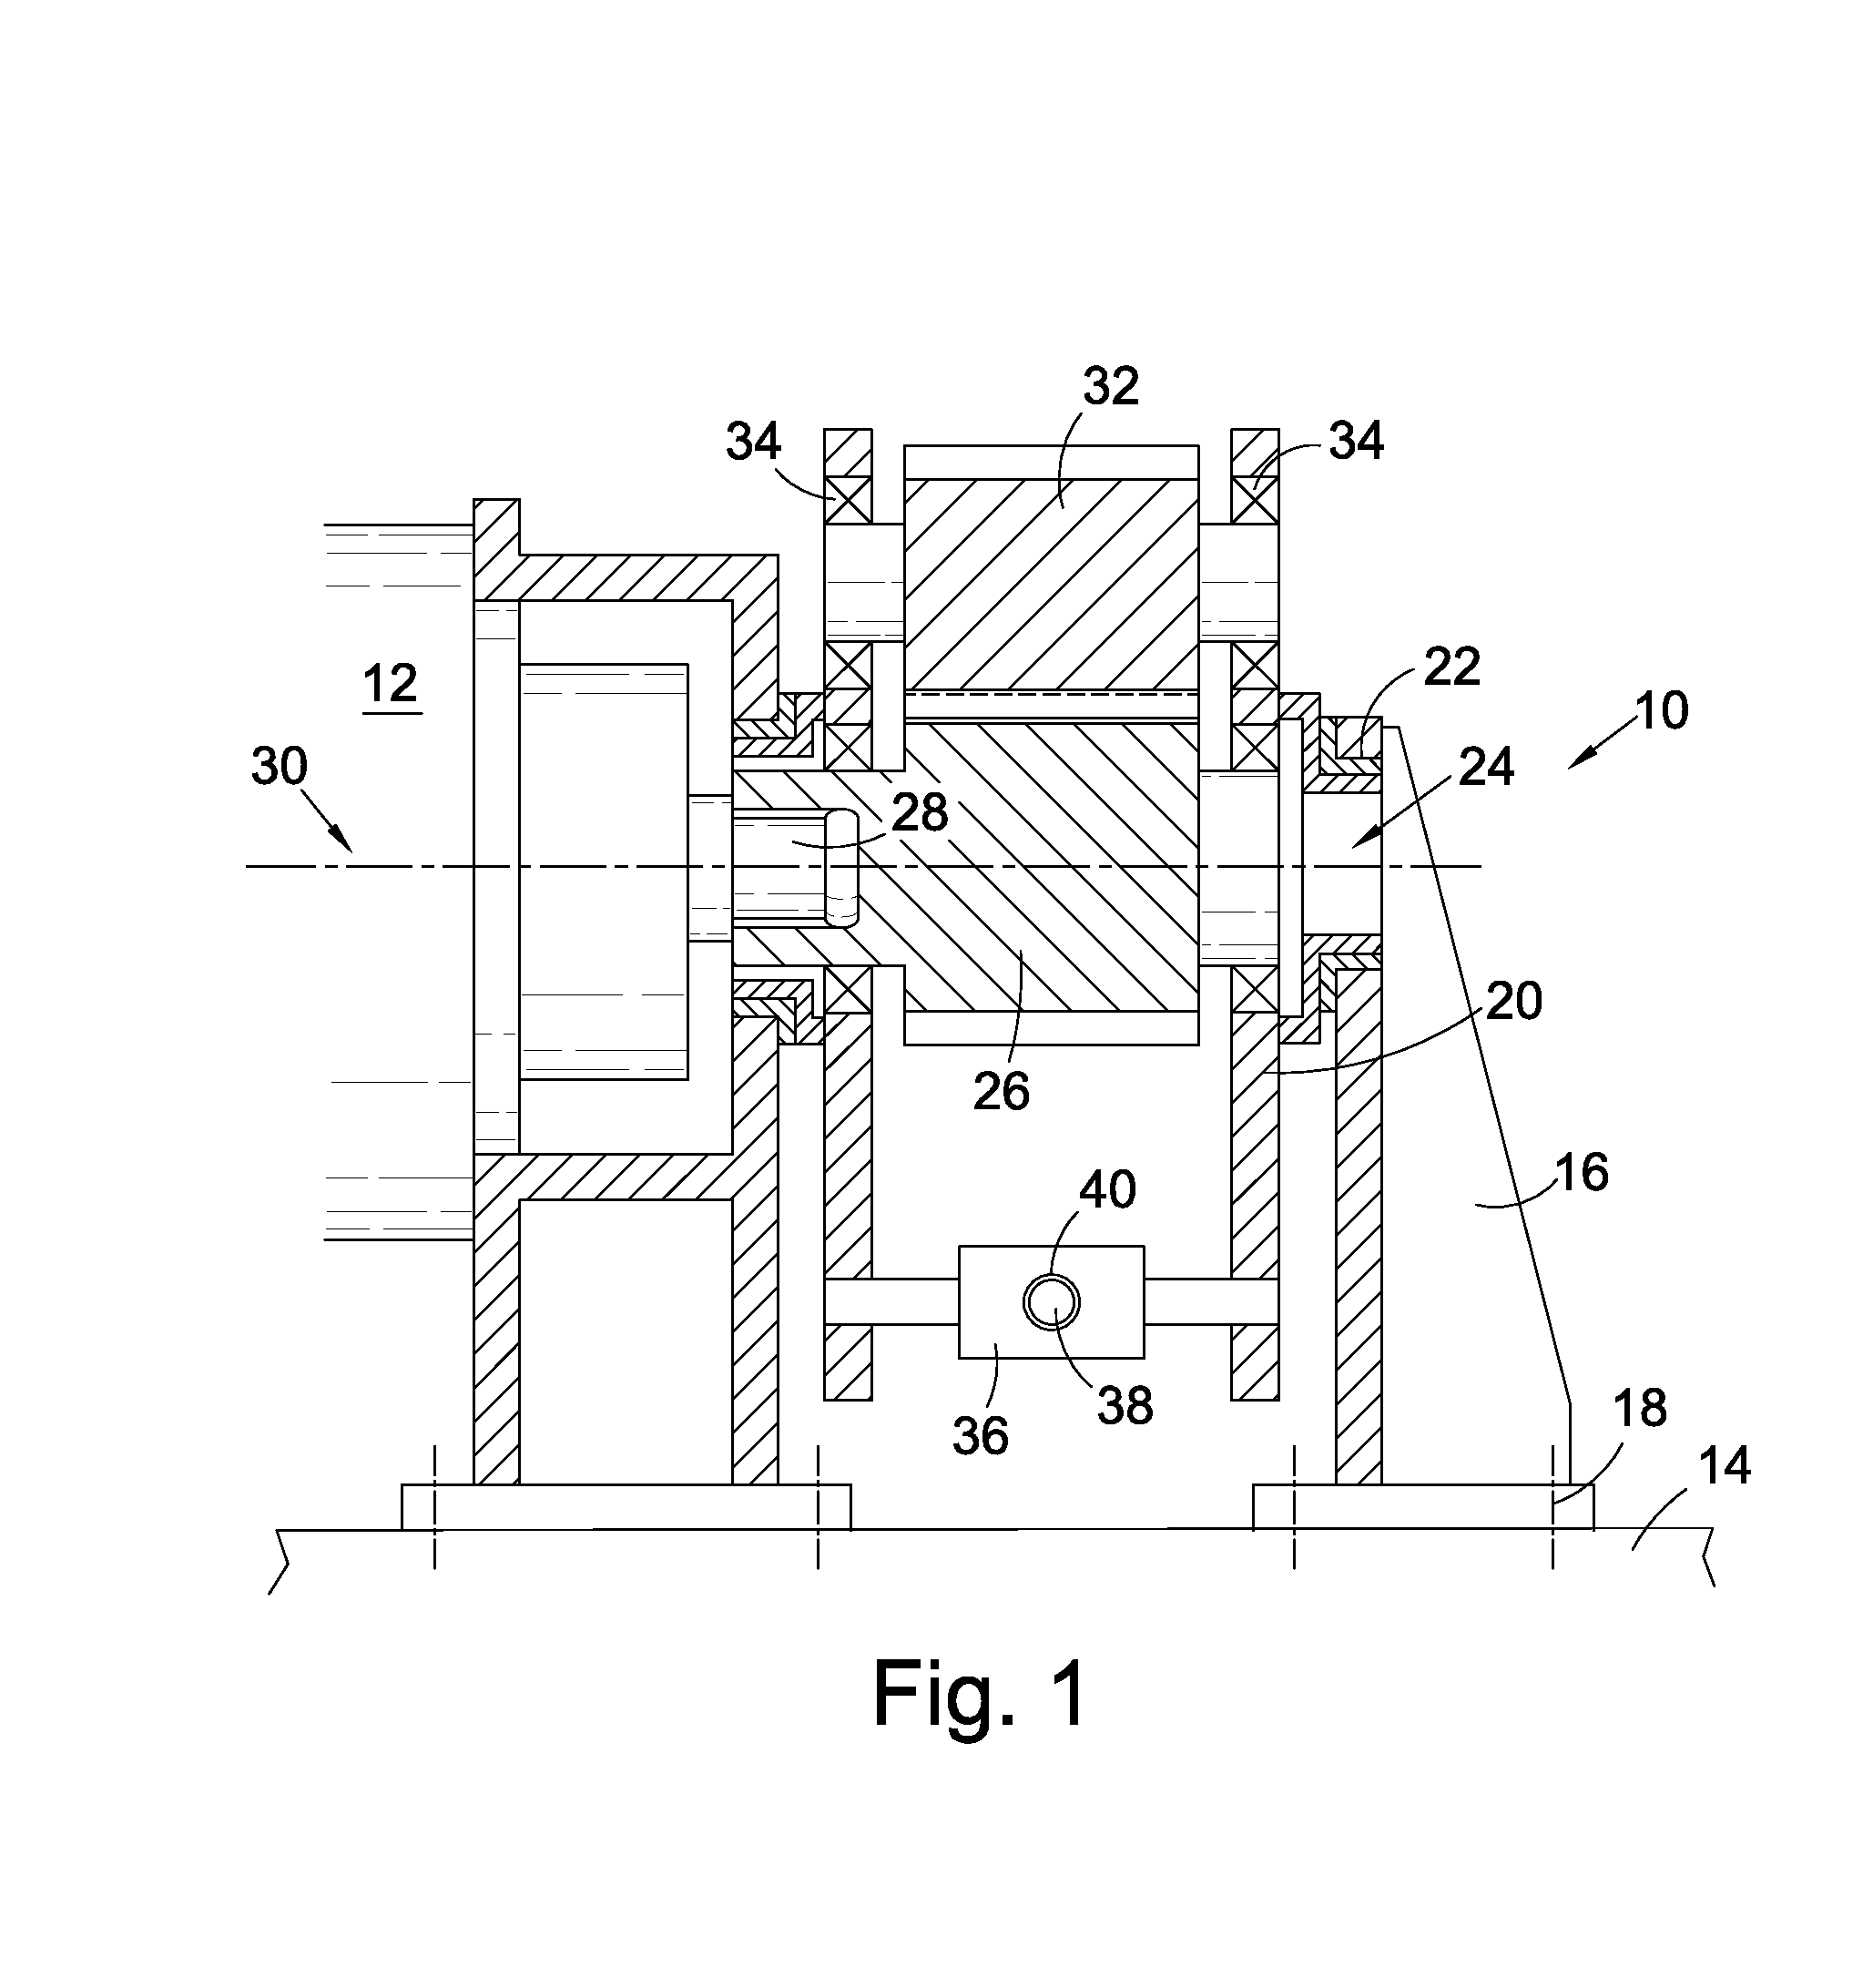 Apparatus and method for rotating a shaft